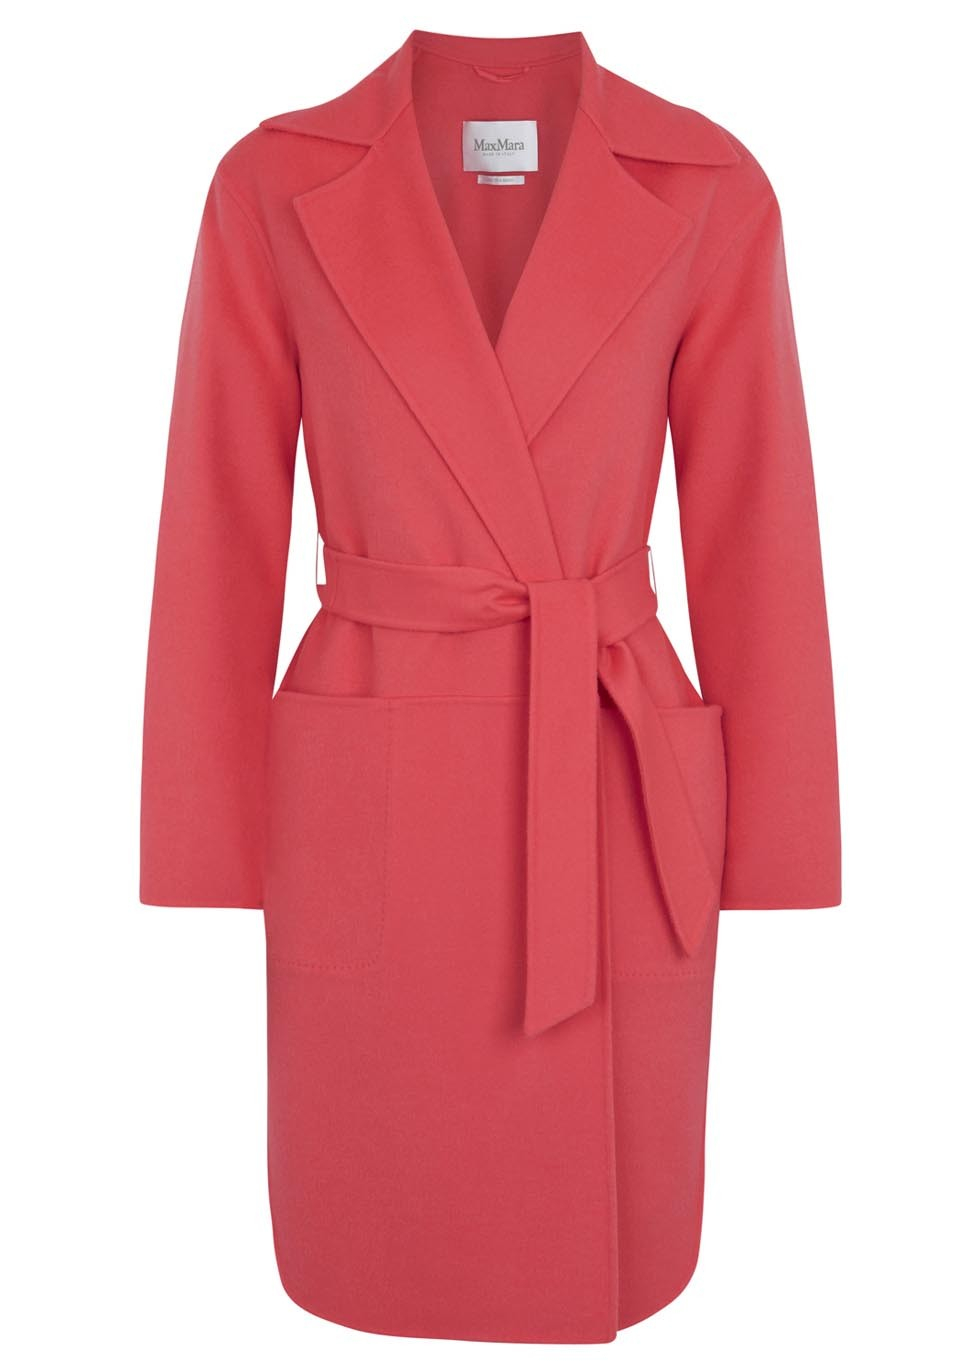 Max Mara Coral Wool and Angora Blend Belted Coat in Red (Coral) | Lyst